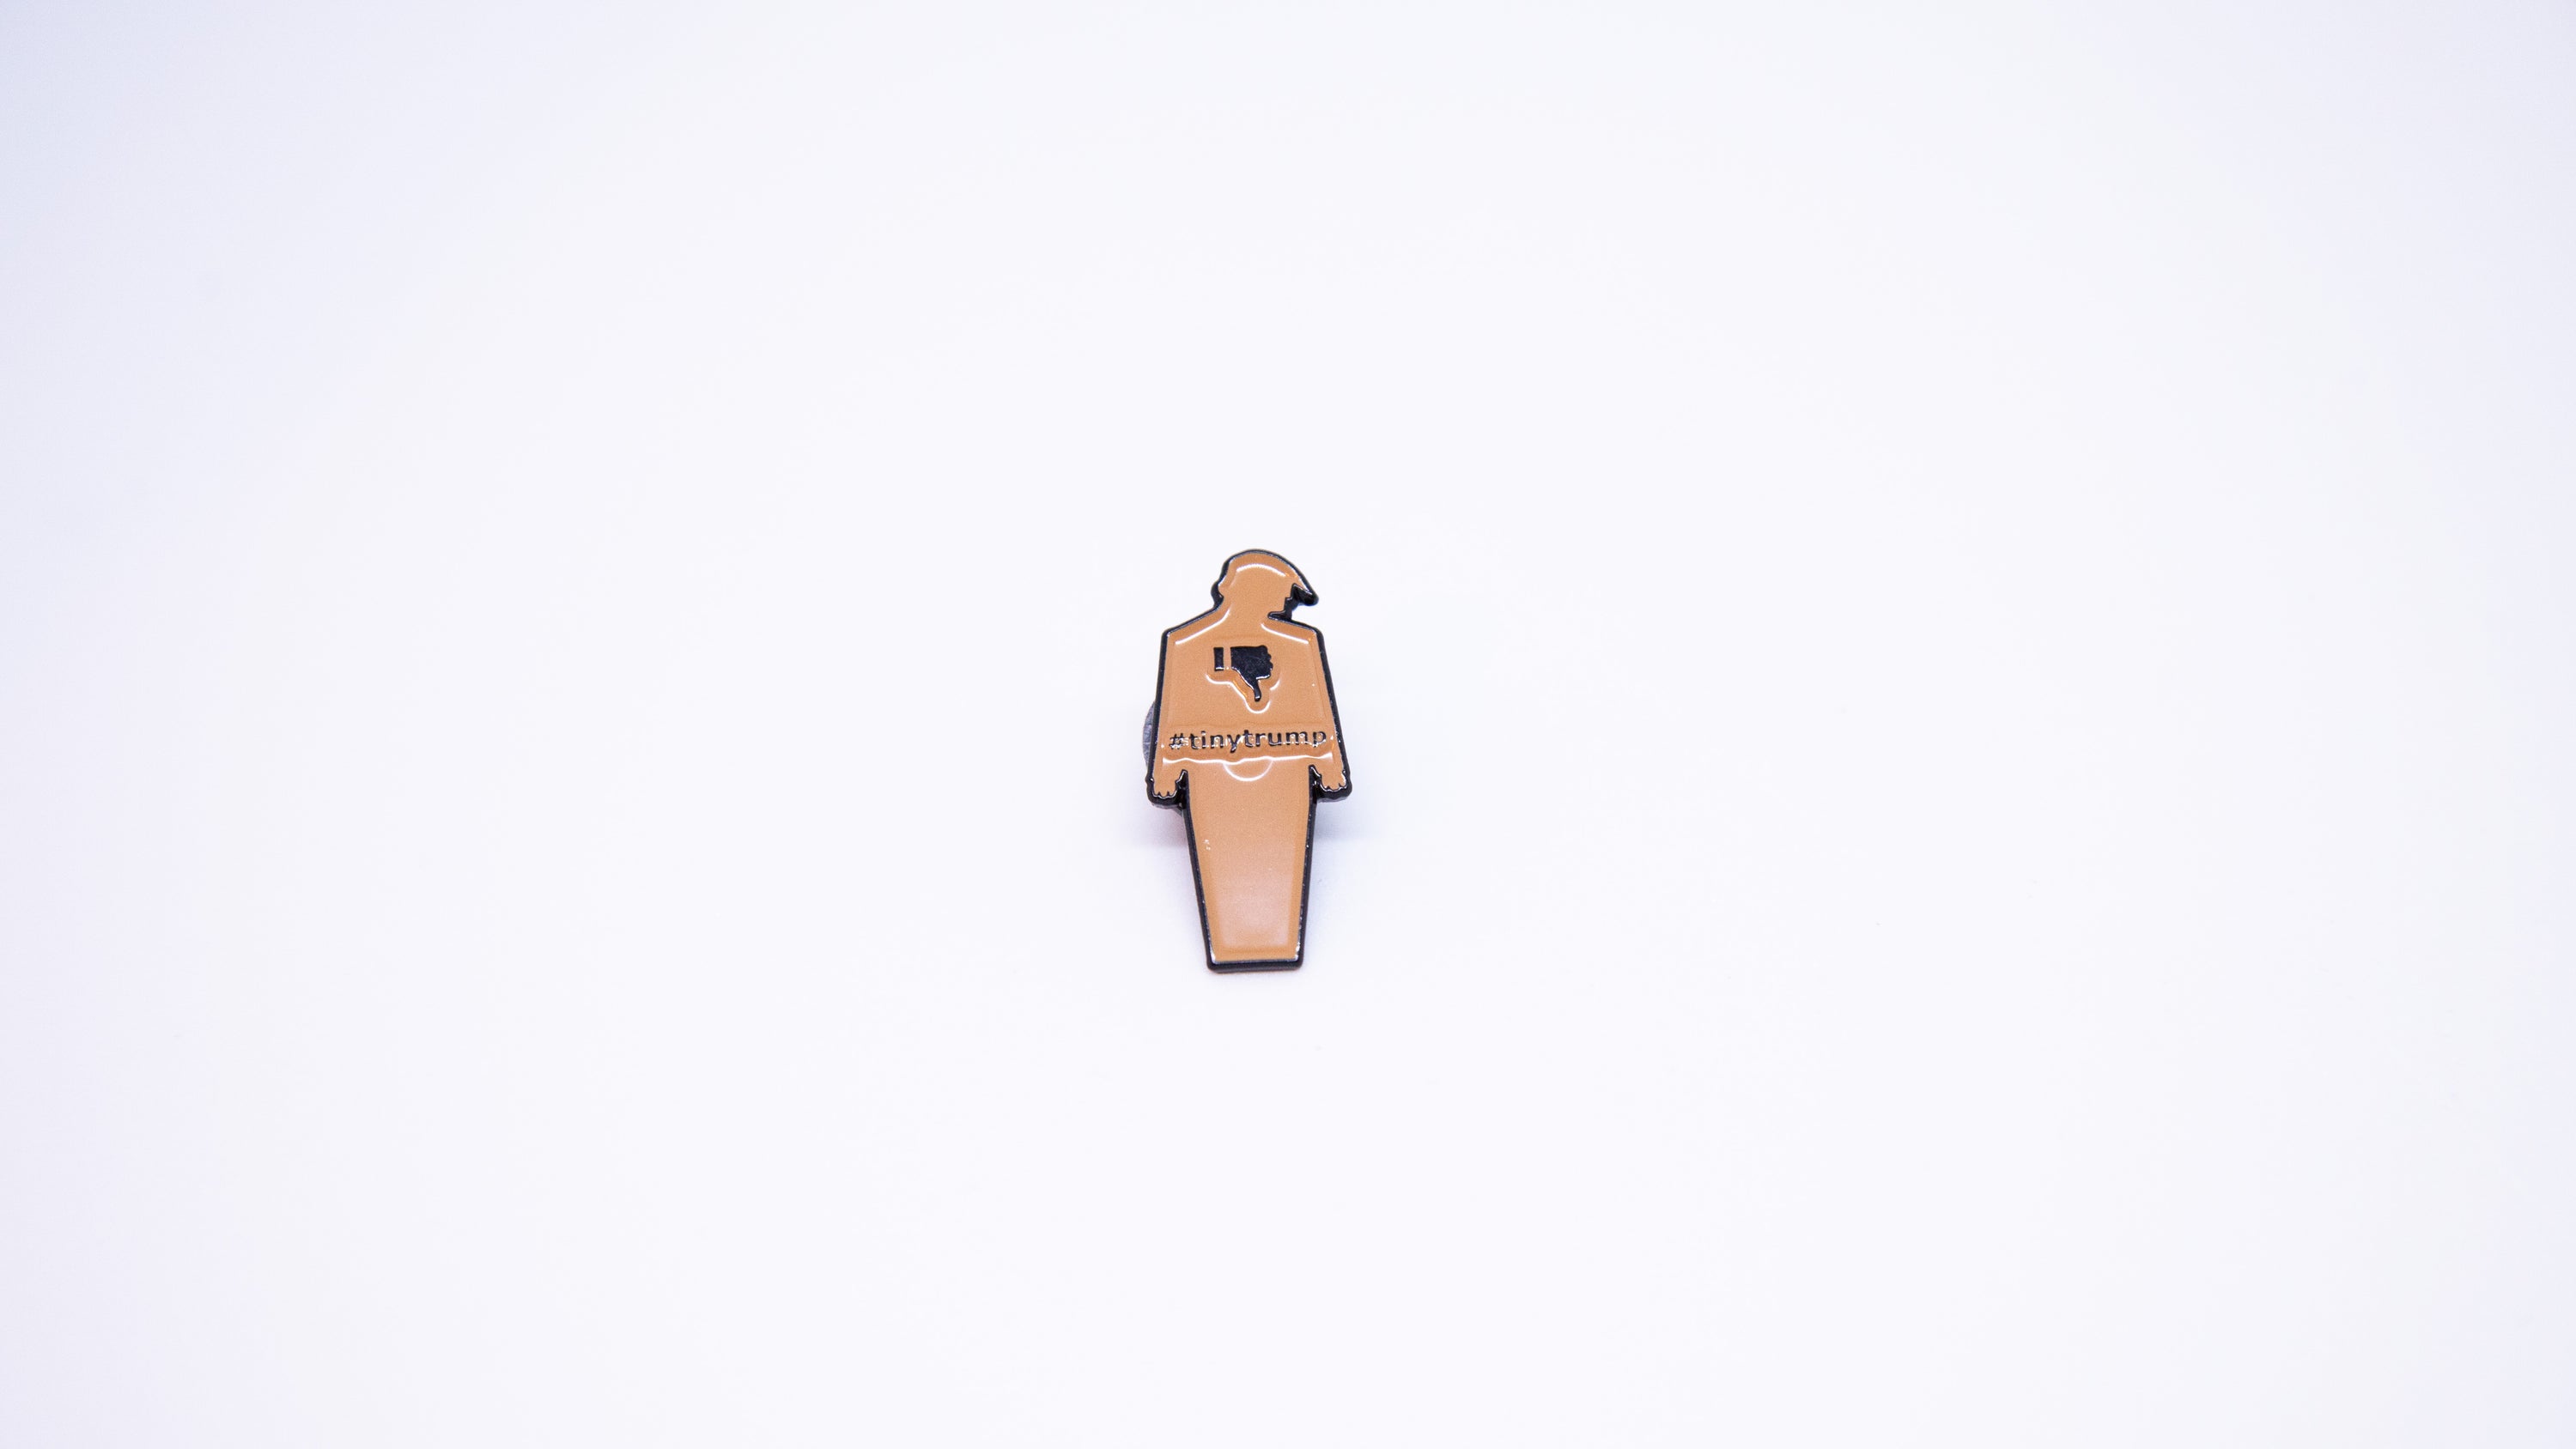 Close up shot of a 1.5" tiny trump enamel pin shown with a thumbs down sign